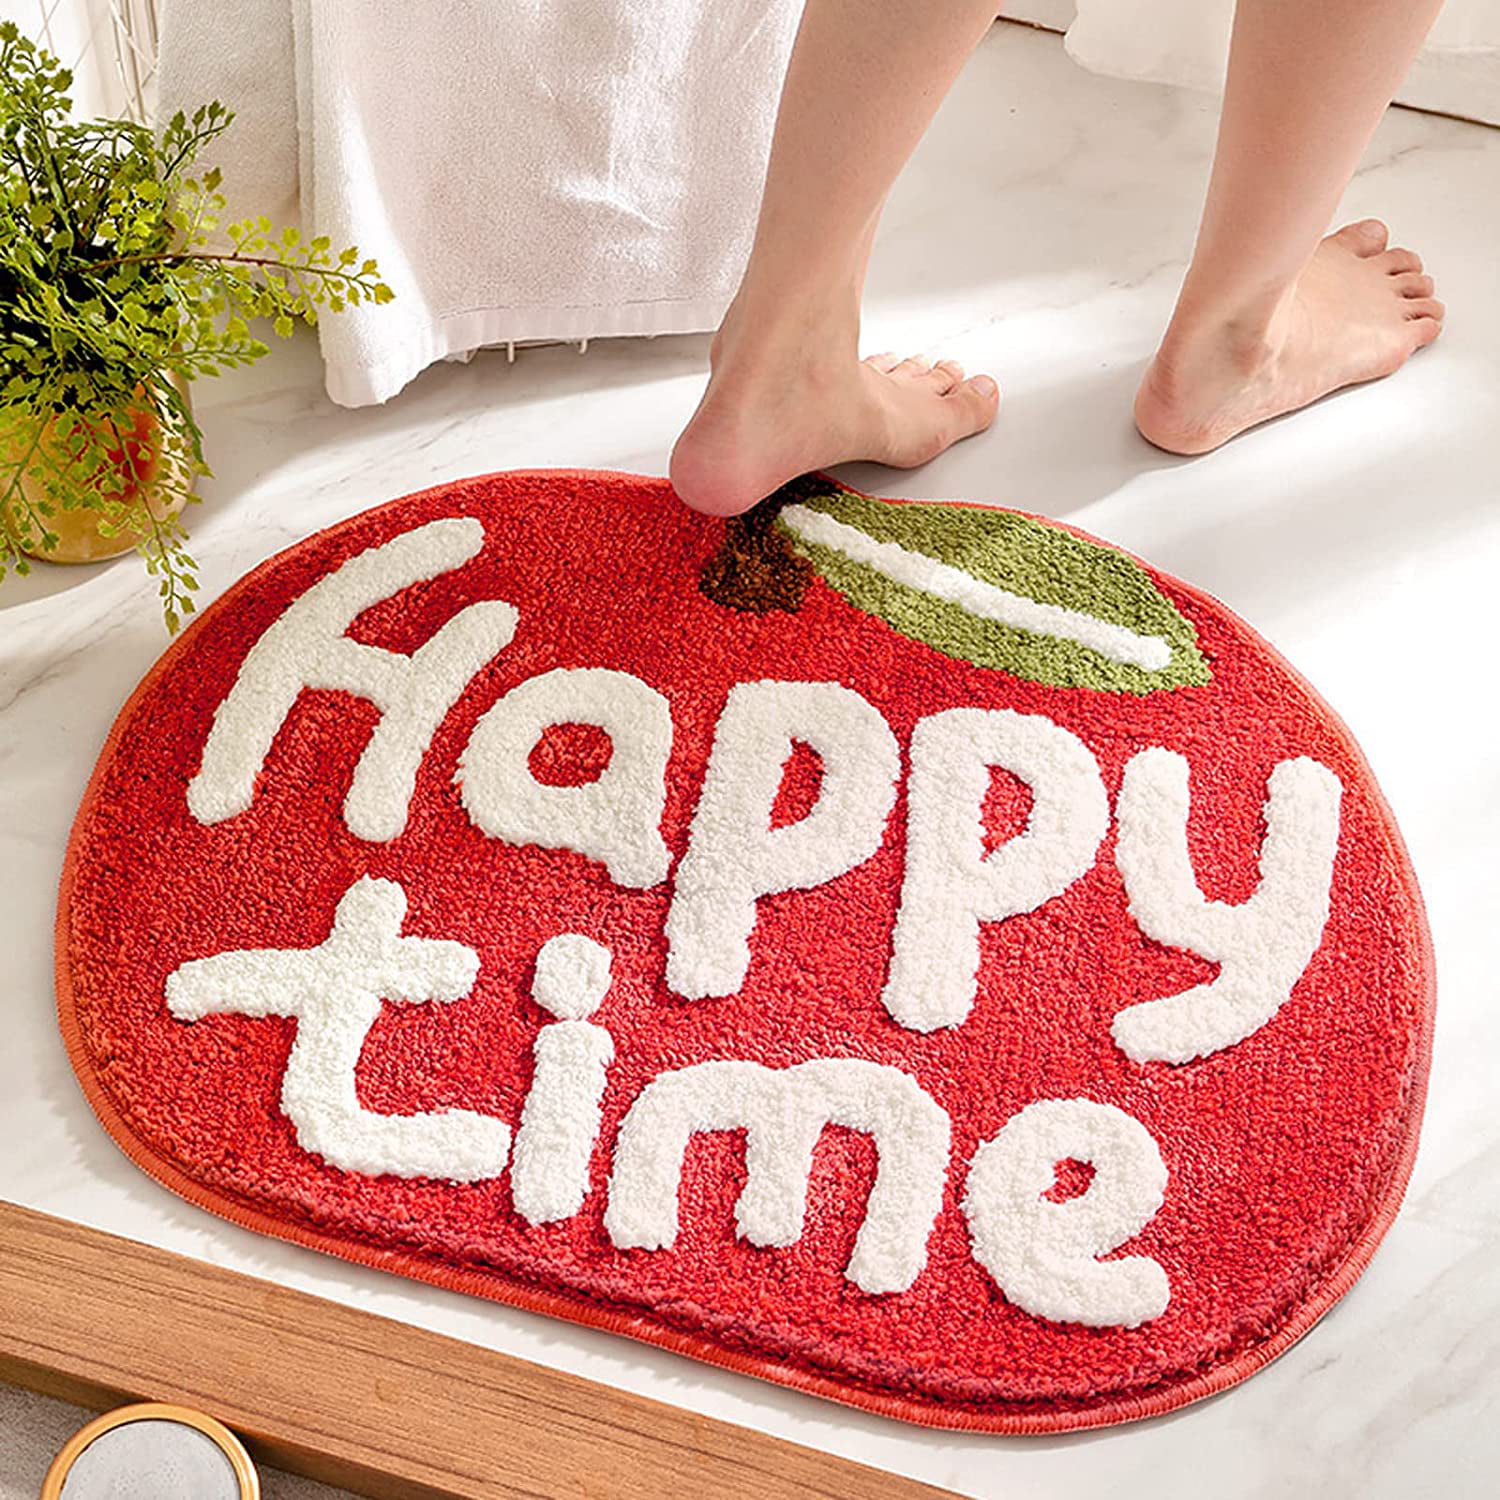 Apple Bathroom Rugs and Mat, Cute Kids Bath Doormats Decor Rug, Red Tufted  Plush, Machine Washable Luxury Shaggy High Absorbent and Anti Slip Foot Mat,Toilet  Rug,Entrance Mat,20